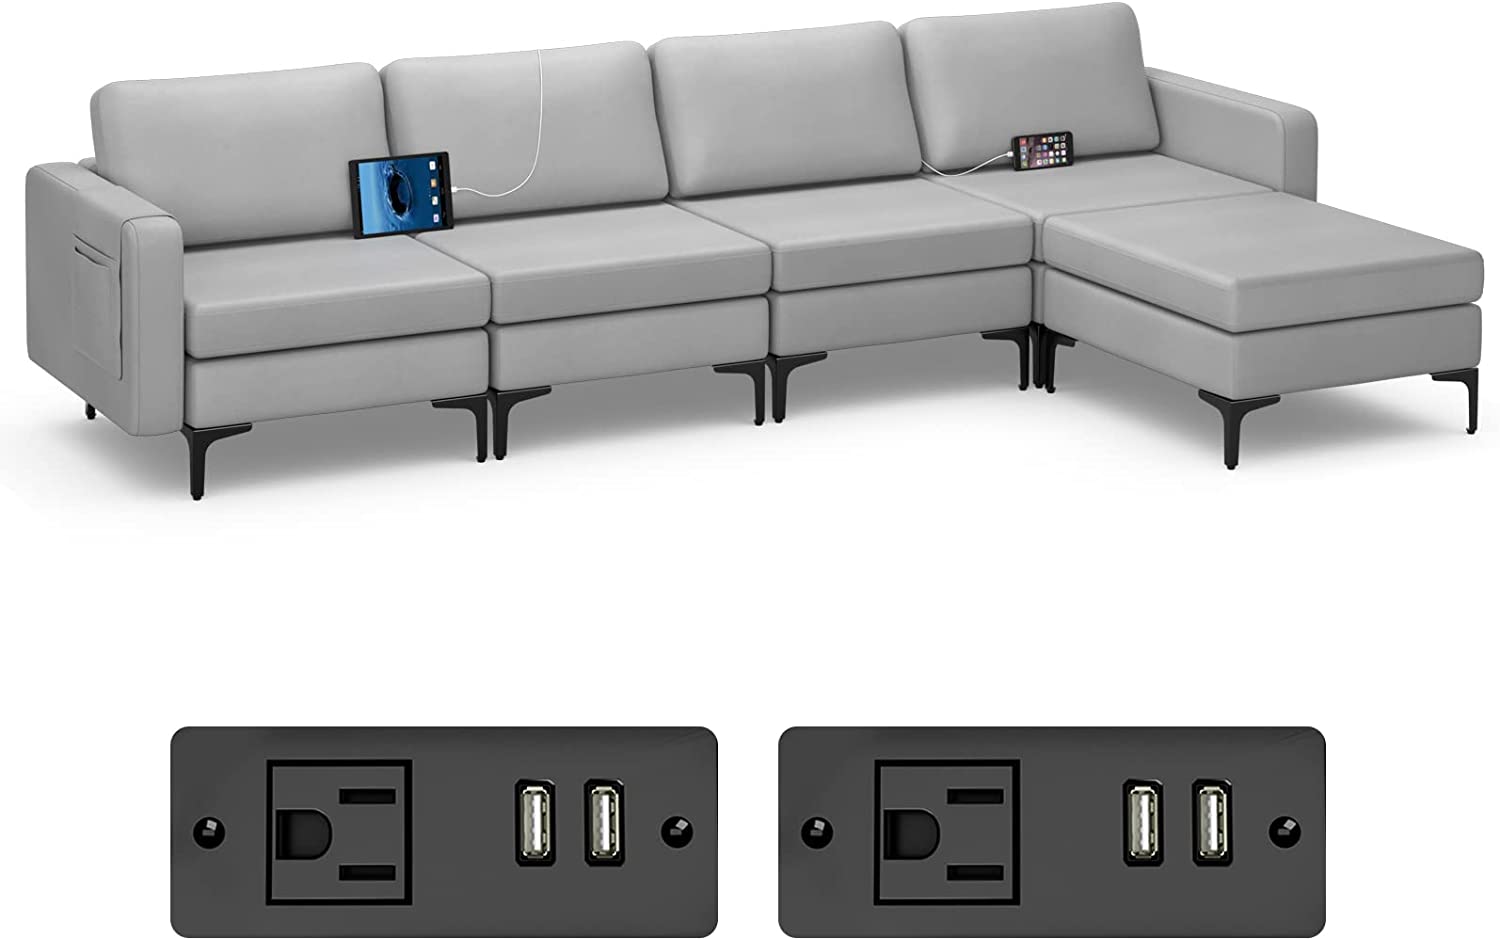 Giantex 4 Seat Convertible Sofa Couch, 123" L Sectional Sleeper with 2 or 1 USB Ports Socket